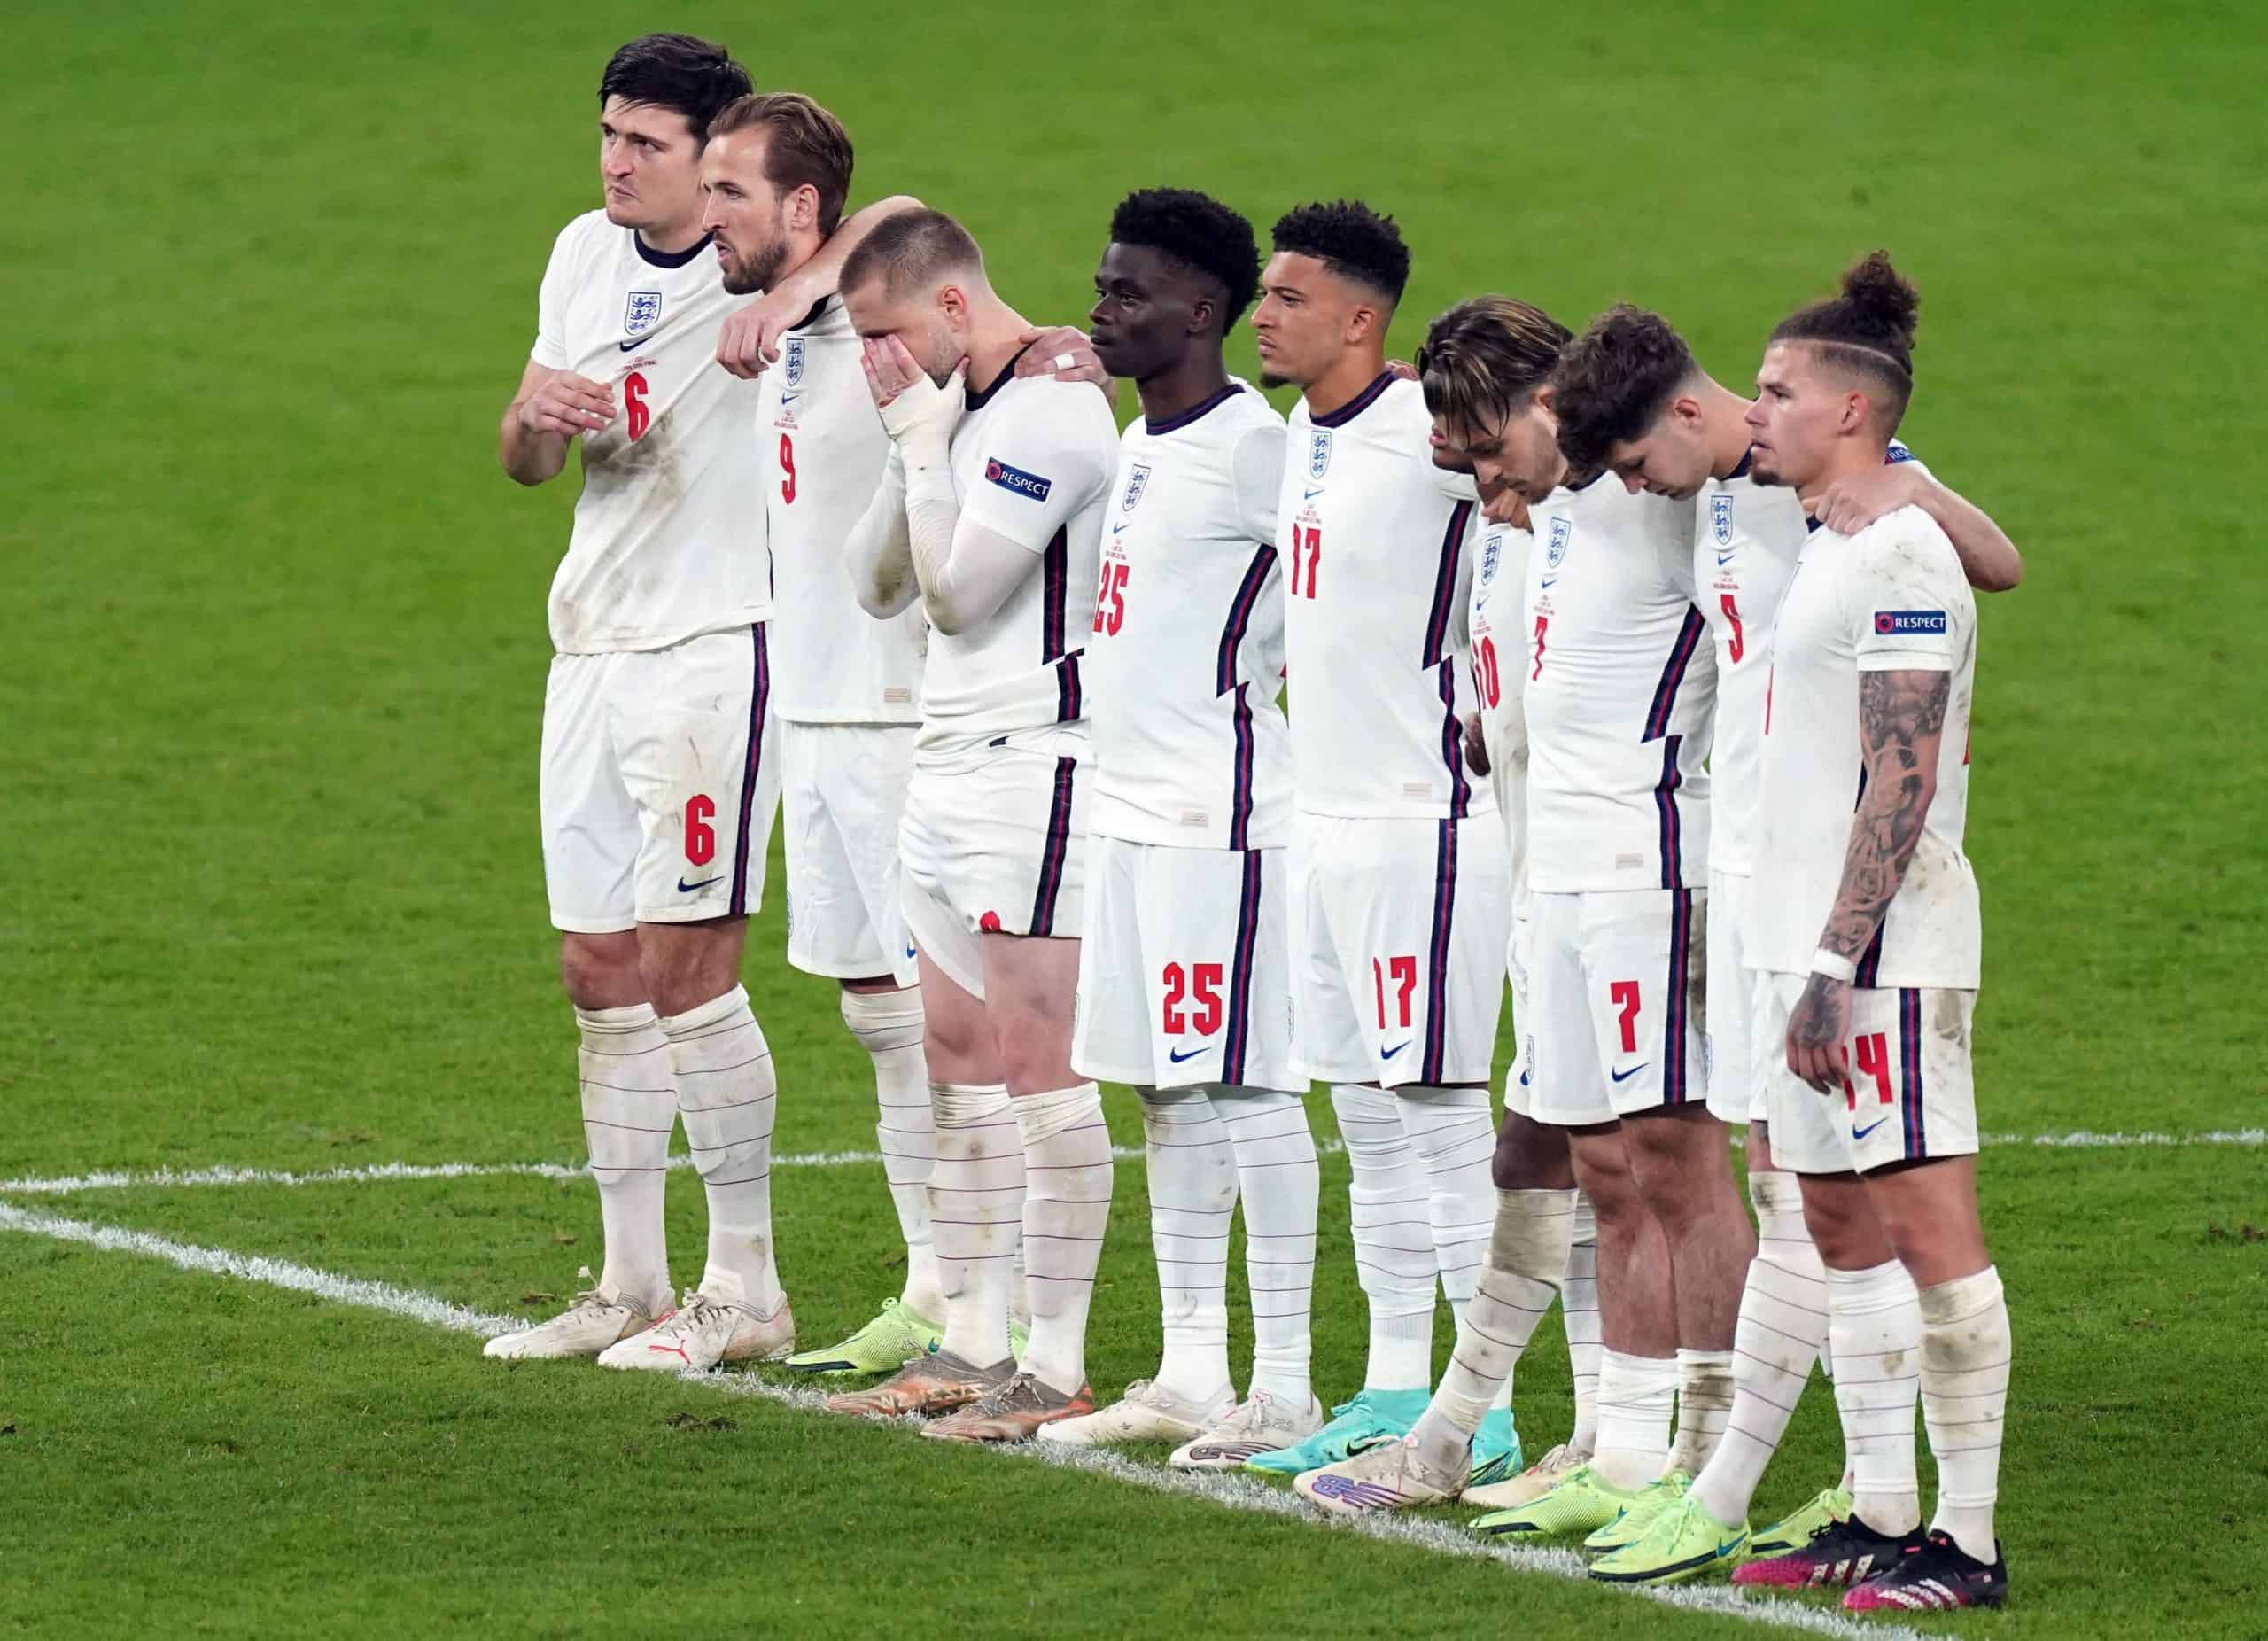 Savills launches investigation into employee’s racist abuse of England stars